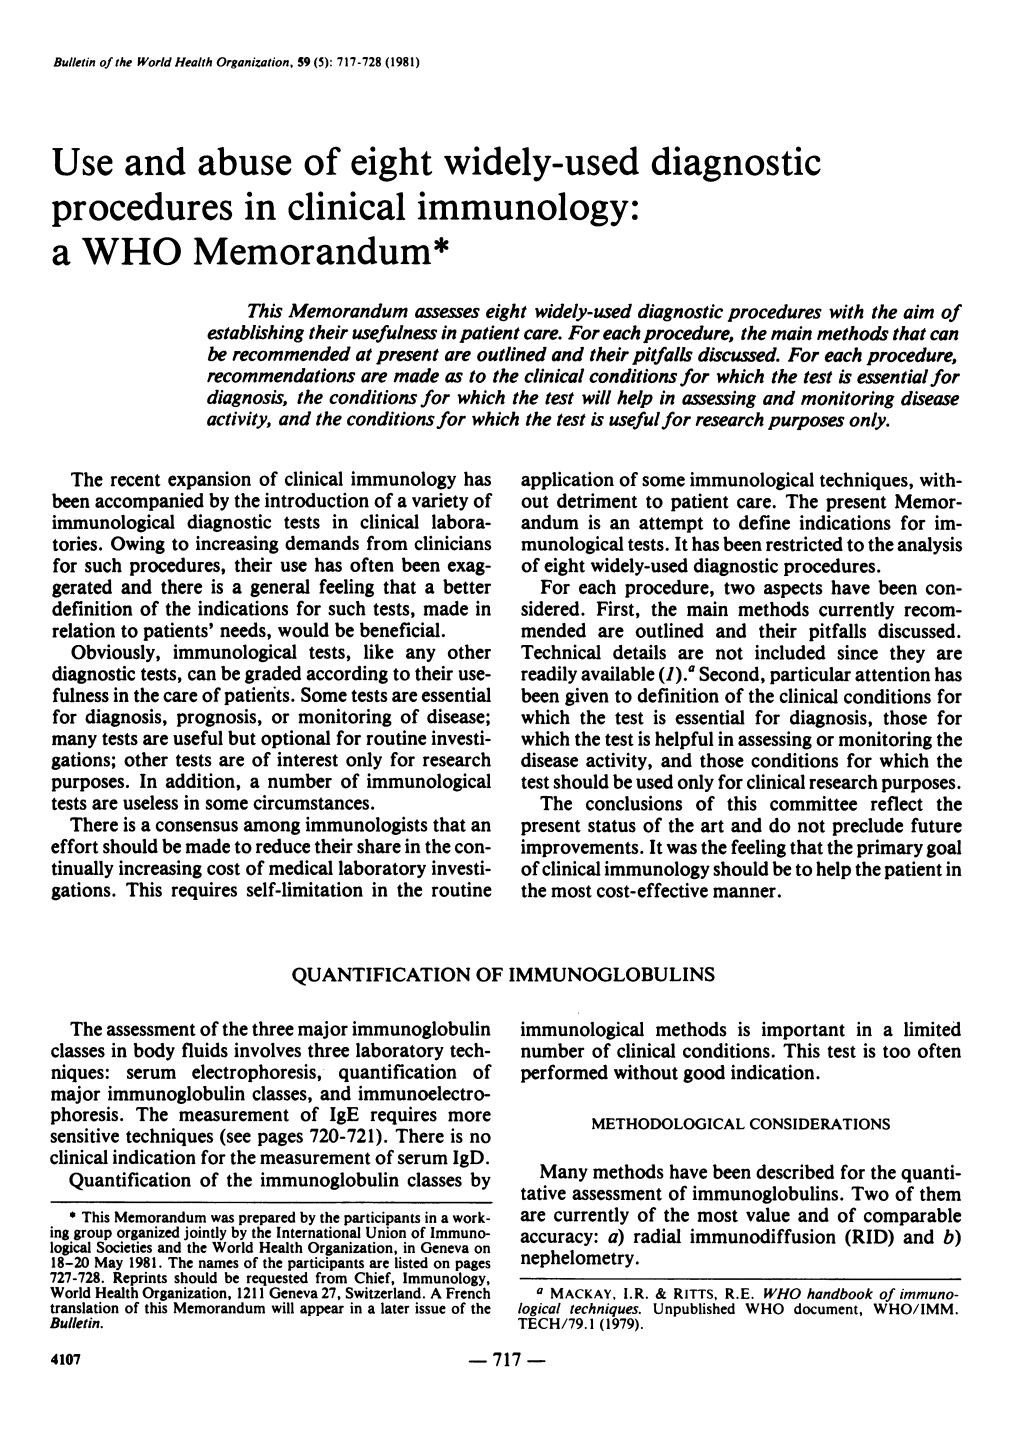 Use and Abuse of Eight Widely-Used Diagnostic Procedures in Clinical Immunology: a WHO Memorandum*